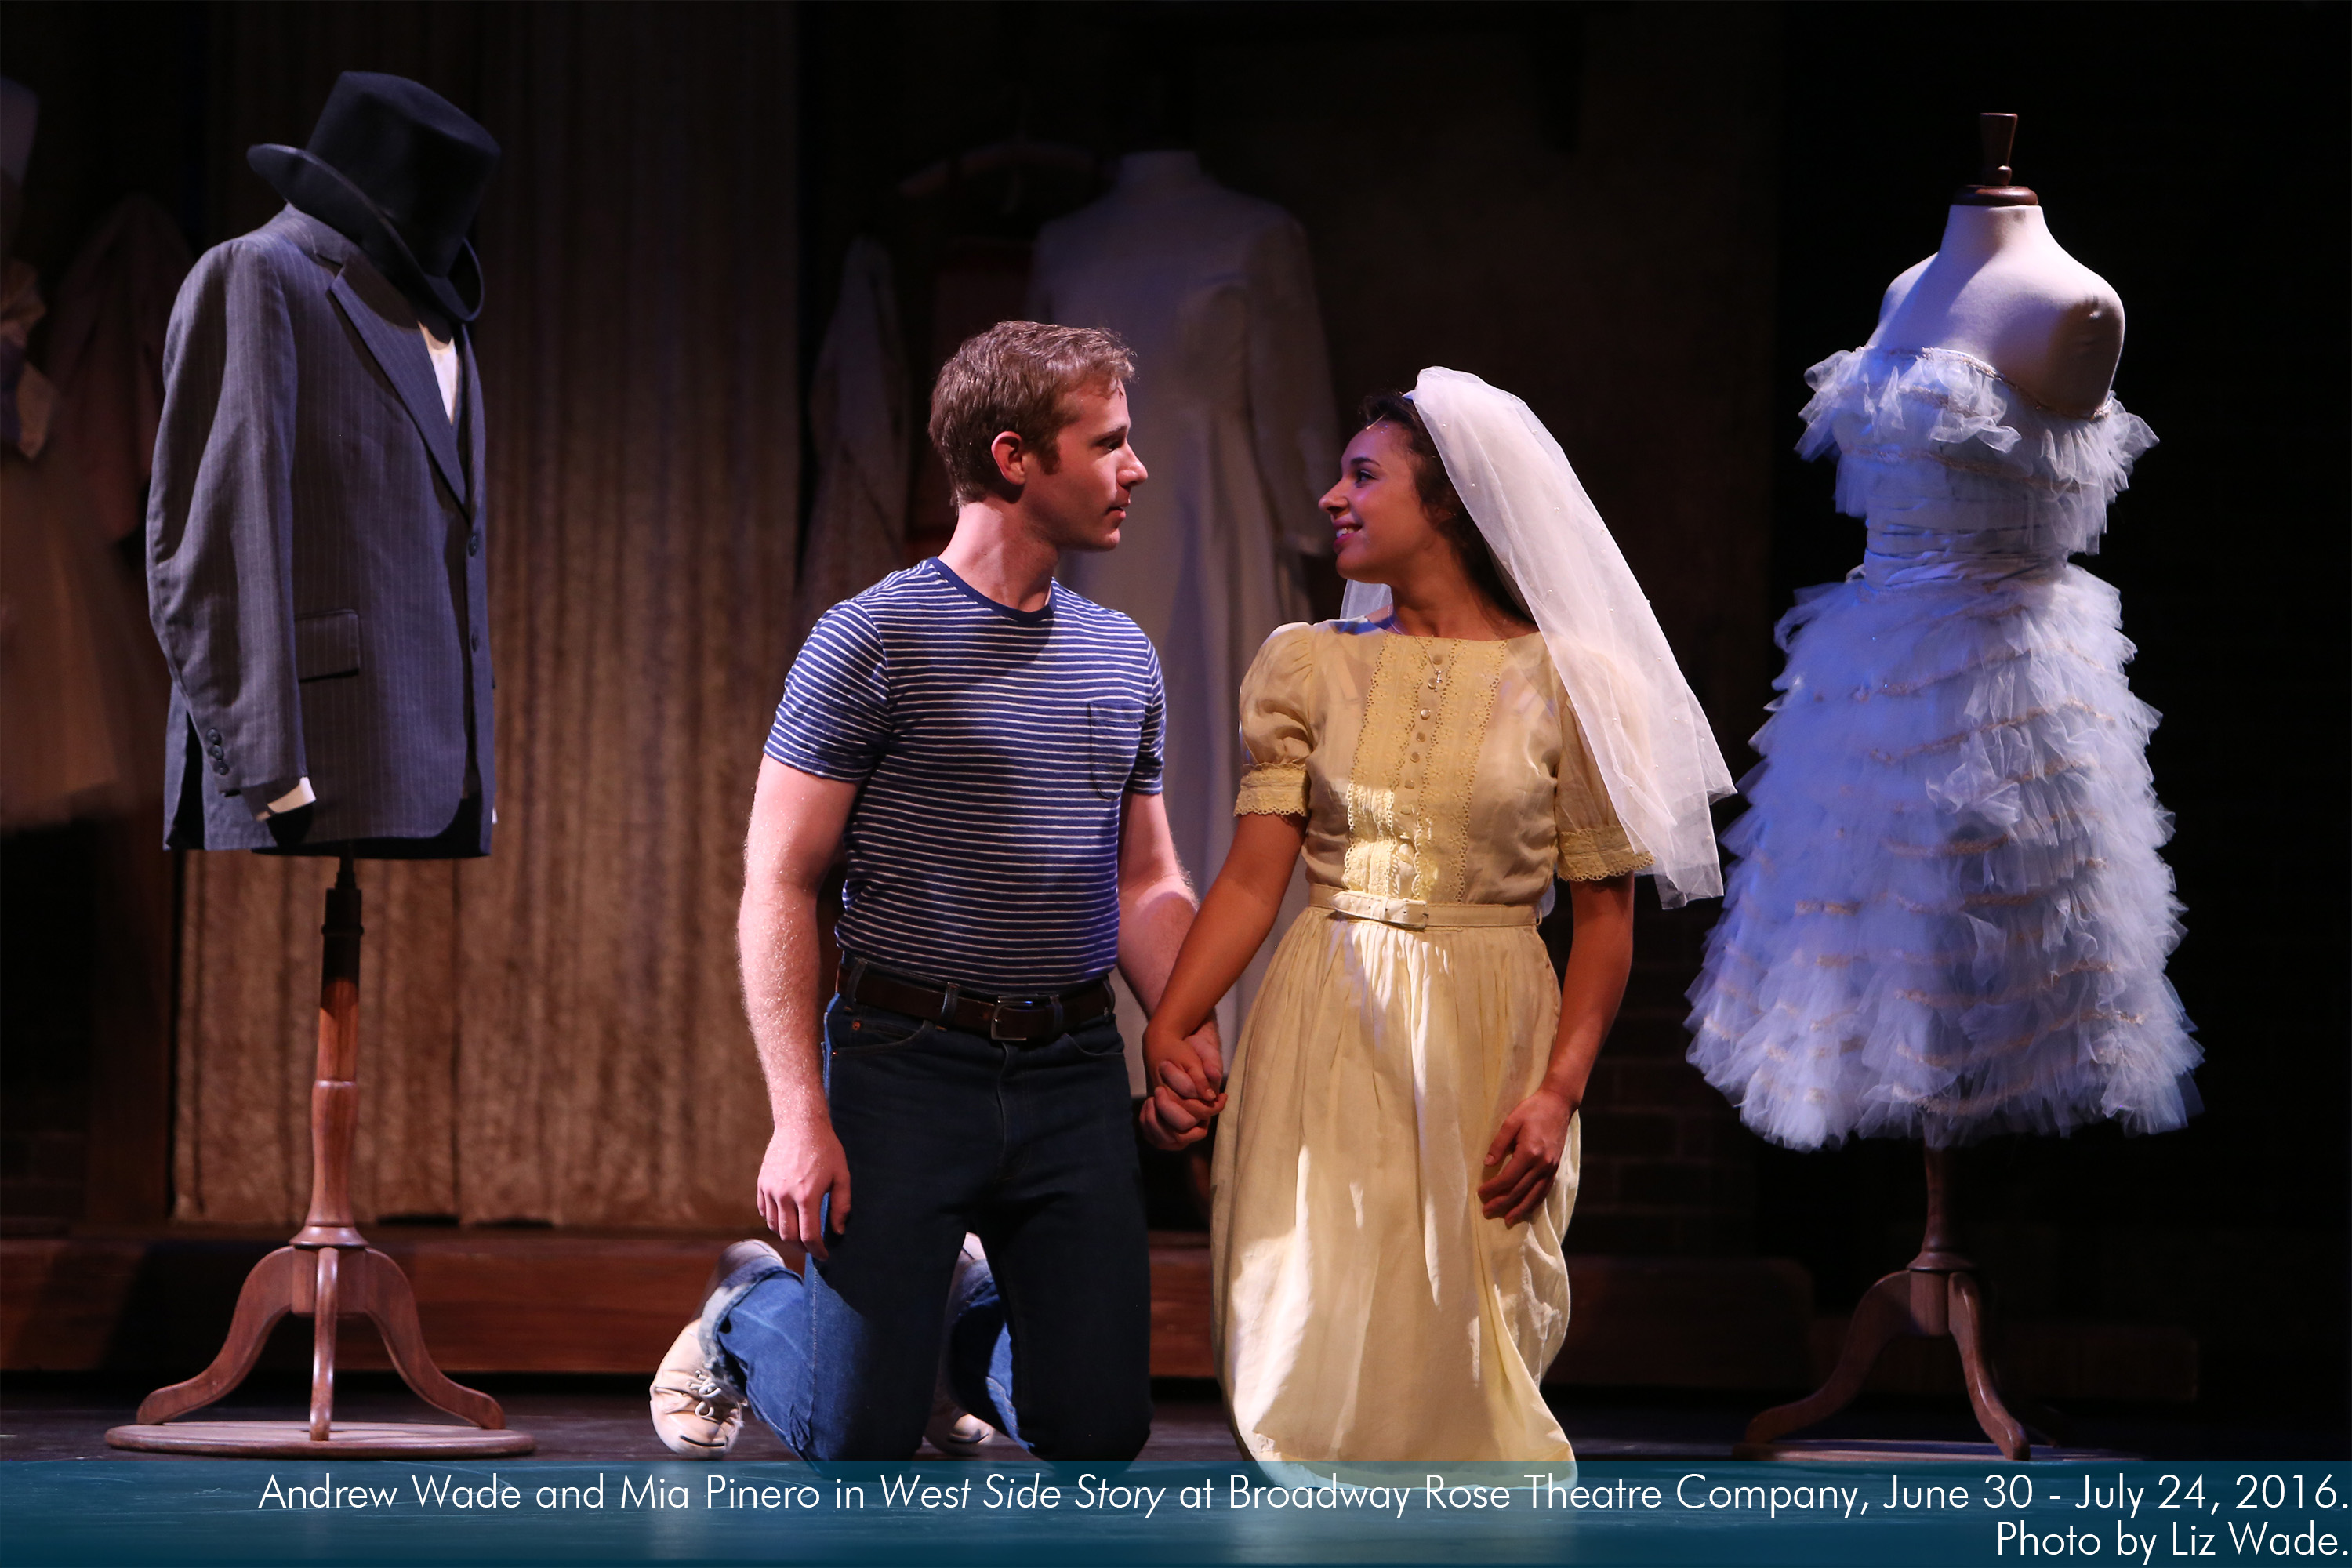 Mia Pinero and Andrew Wade in West Side Story at Broadway Rose Theatre Company. Photo by Liz Wade.